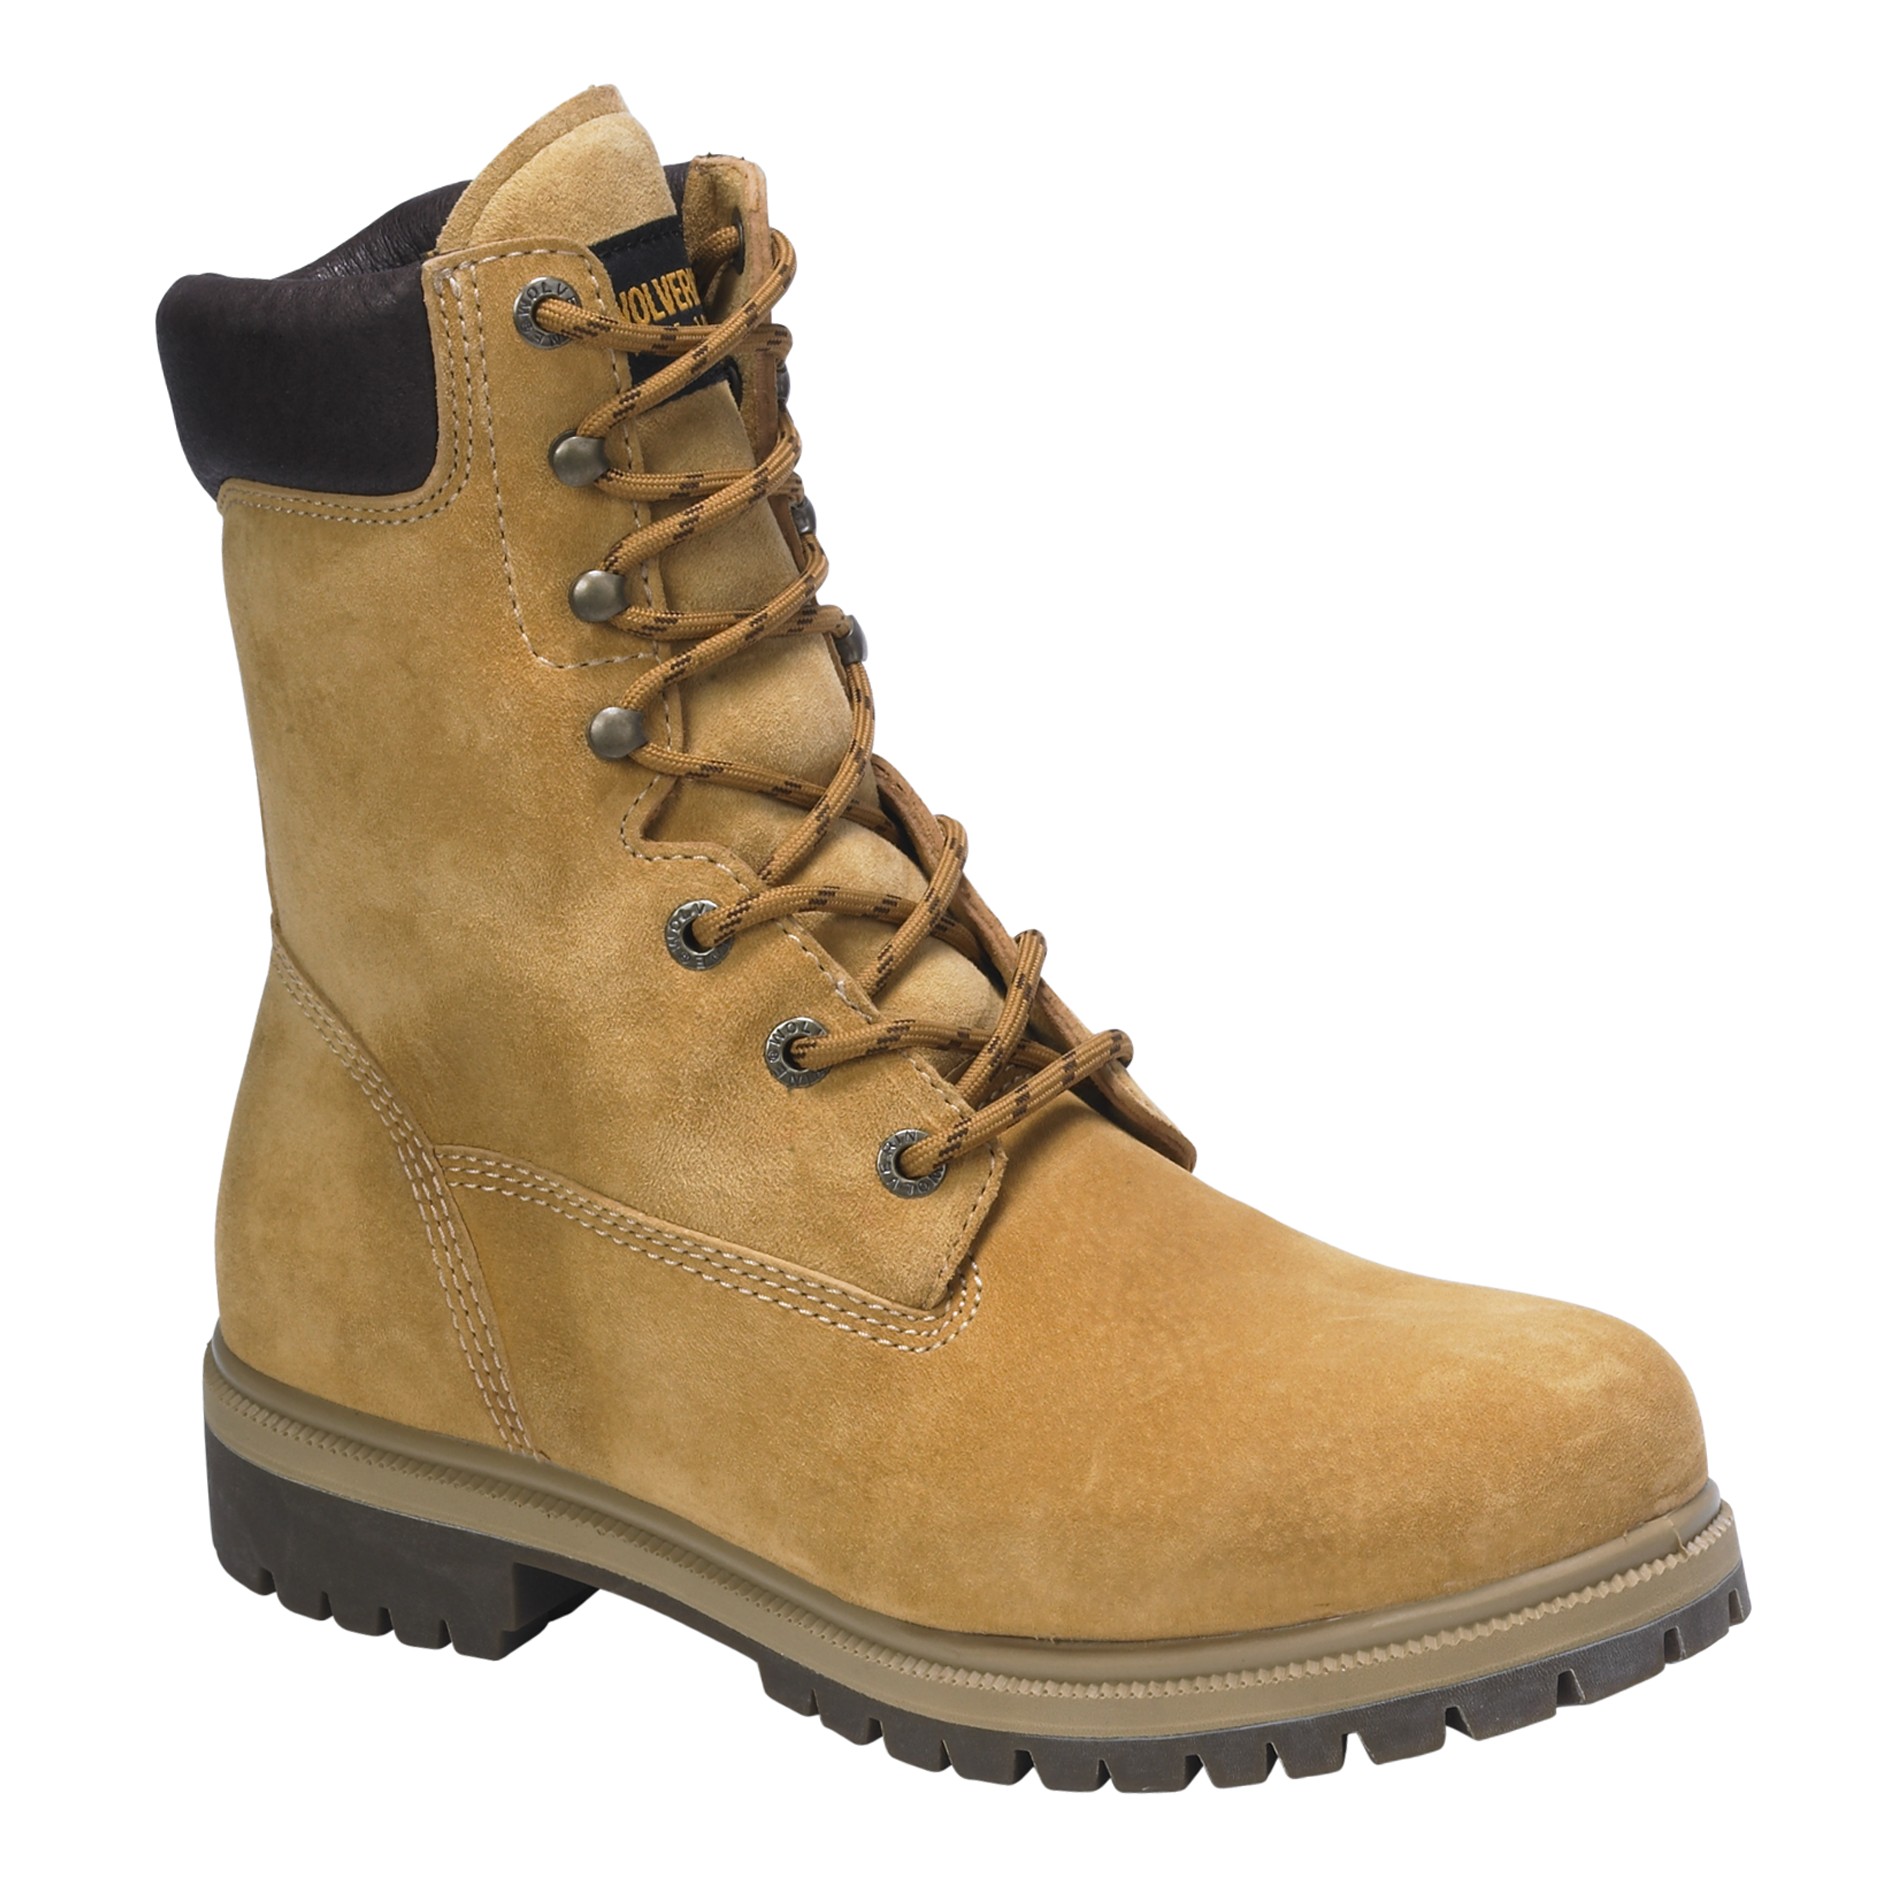 insulated men's work boots